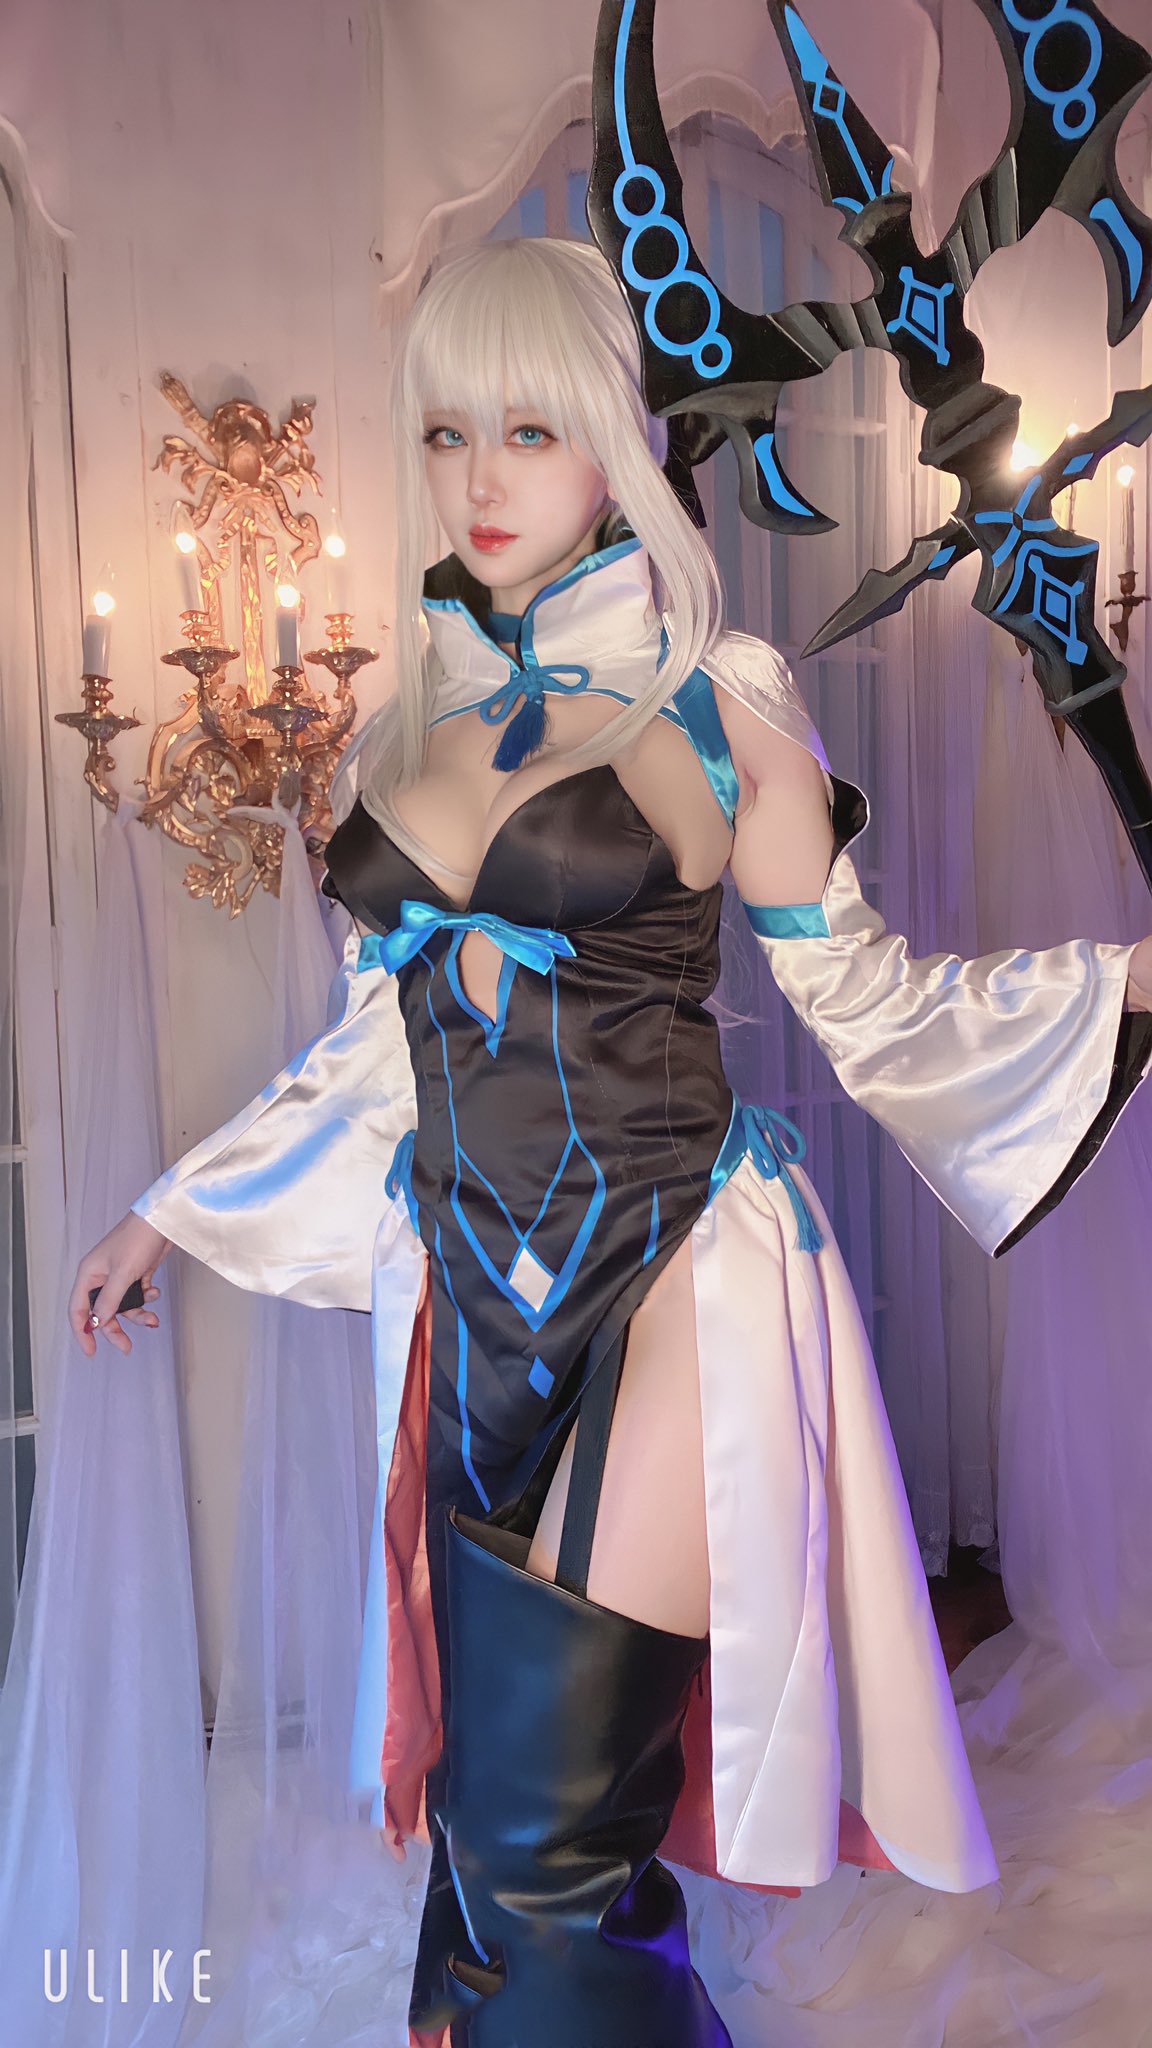 Asian Asian Cosplayer Japanese Japanese Women Cosplay Women Fate Series Fate Grand Order Morgan Le F 1152x2048